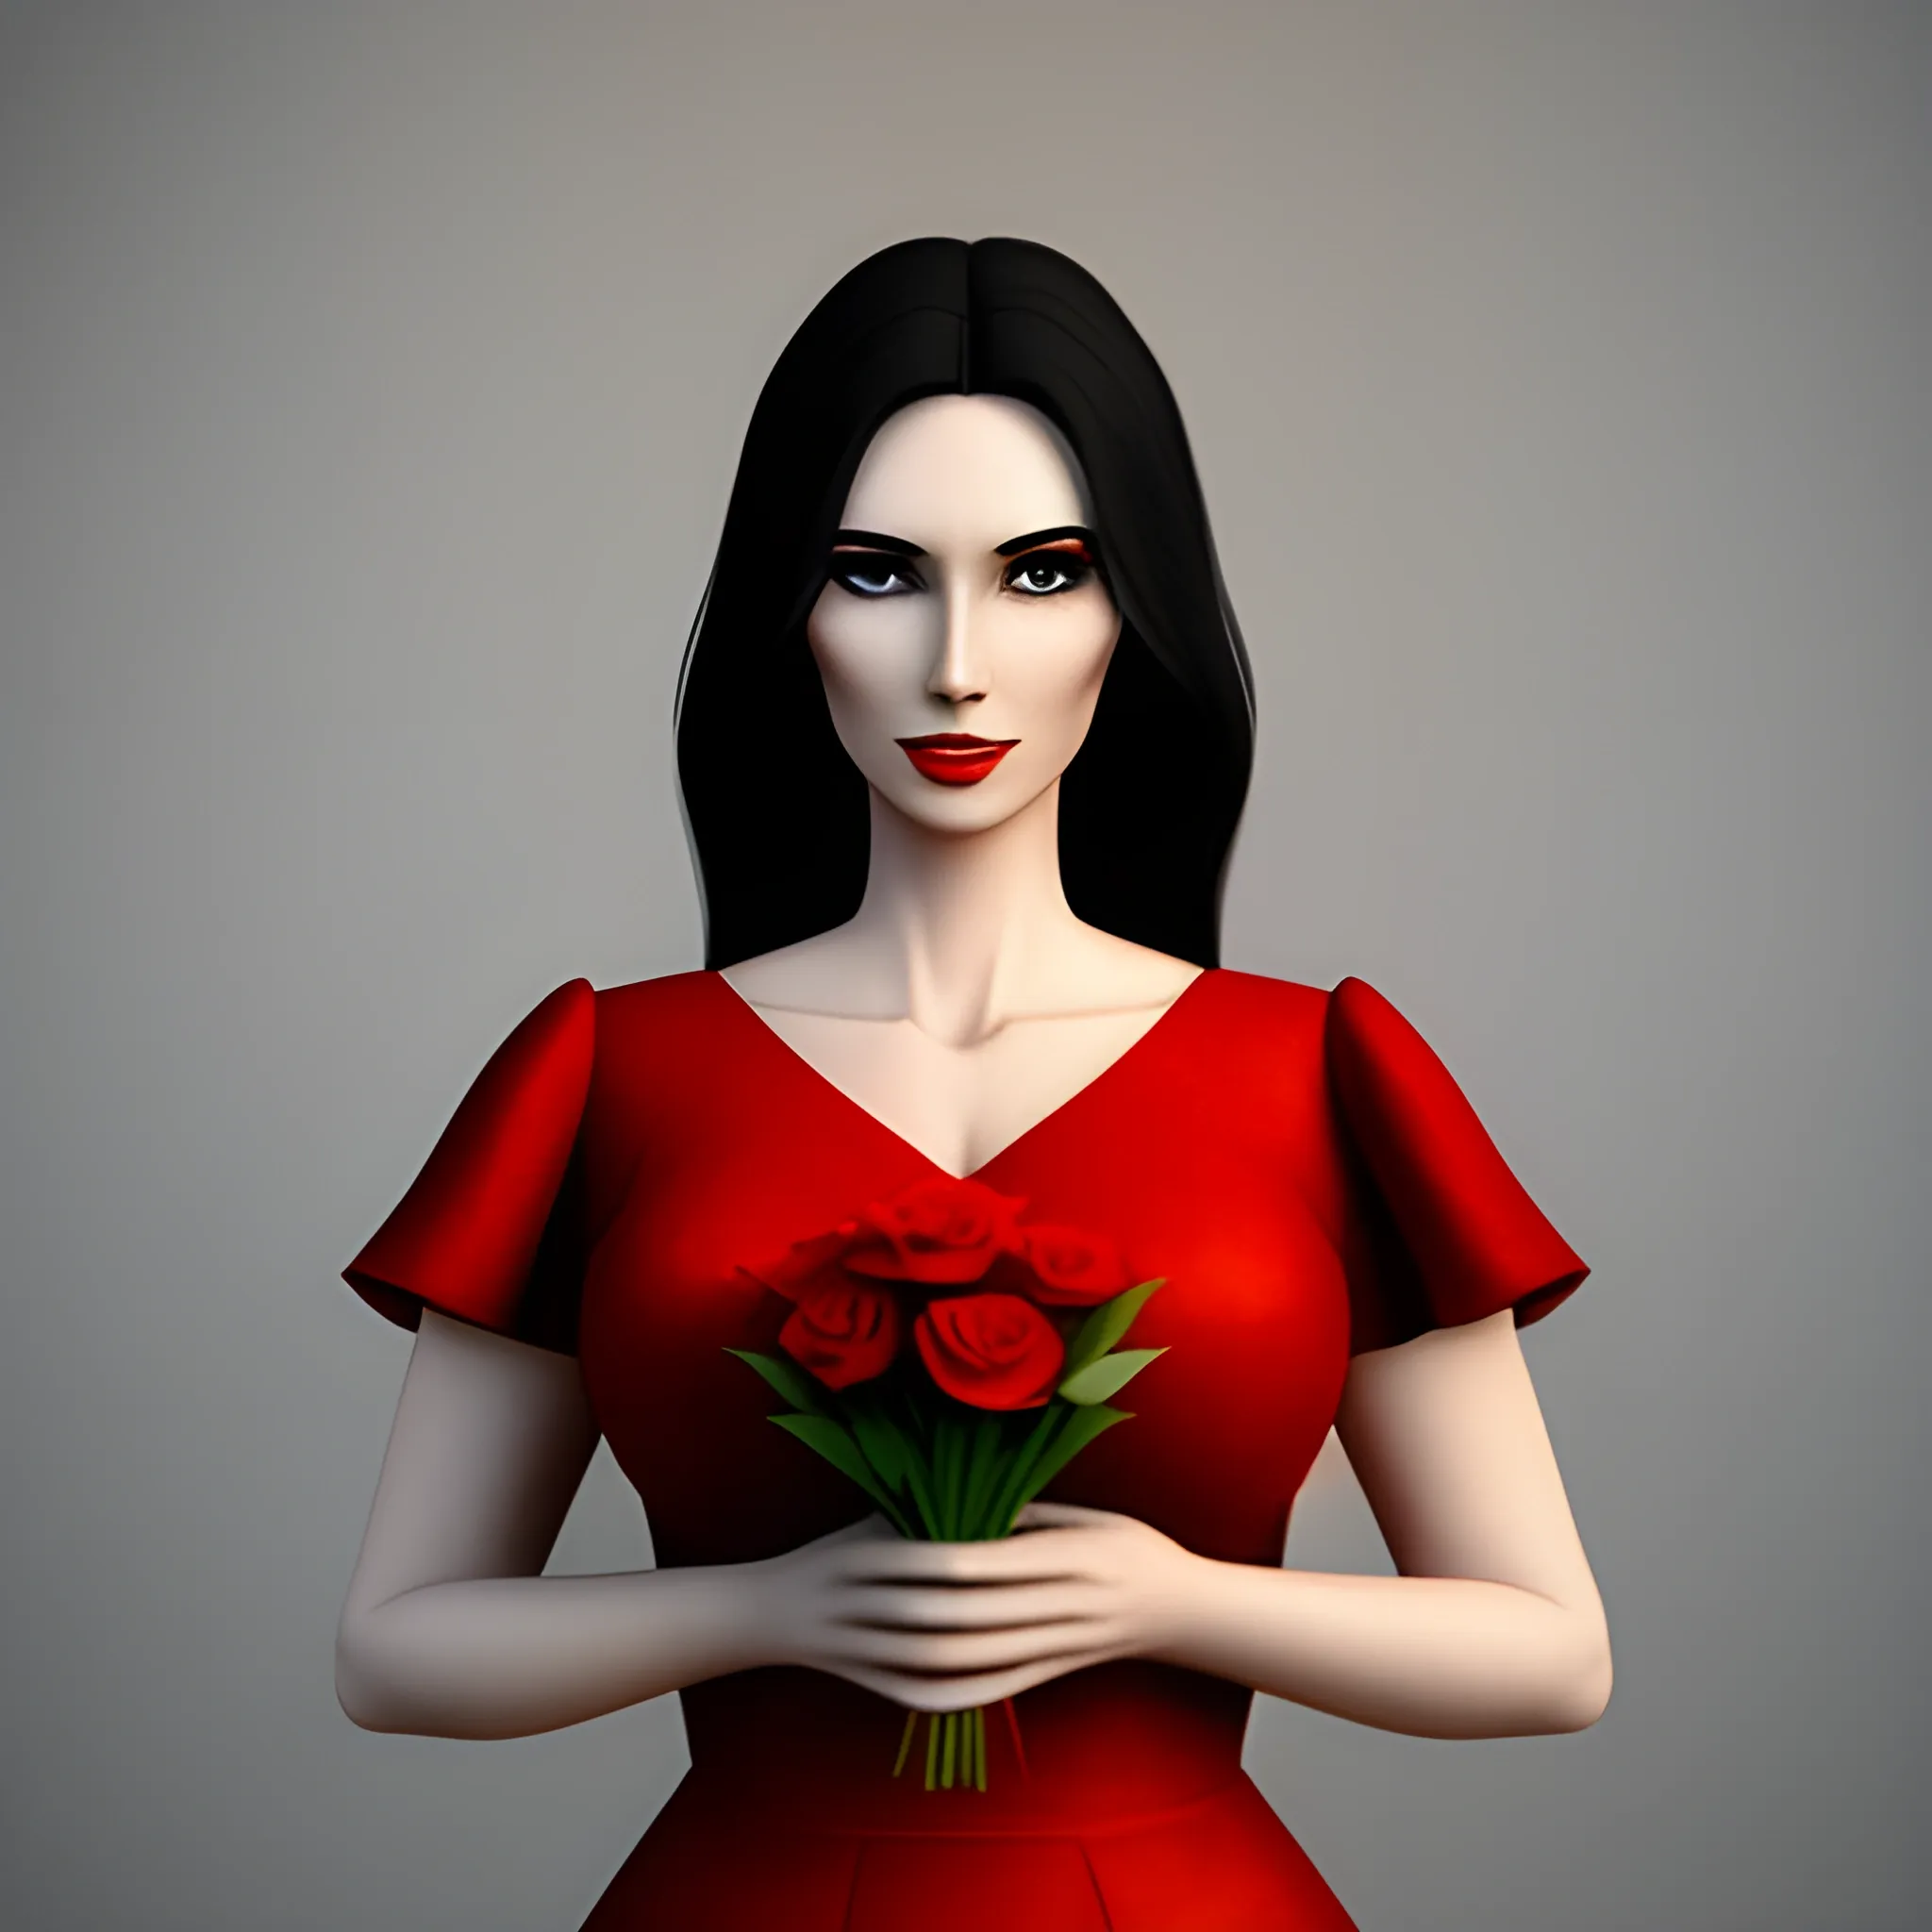 five year's old girl holding a red flower in her hand, 3D